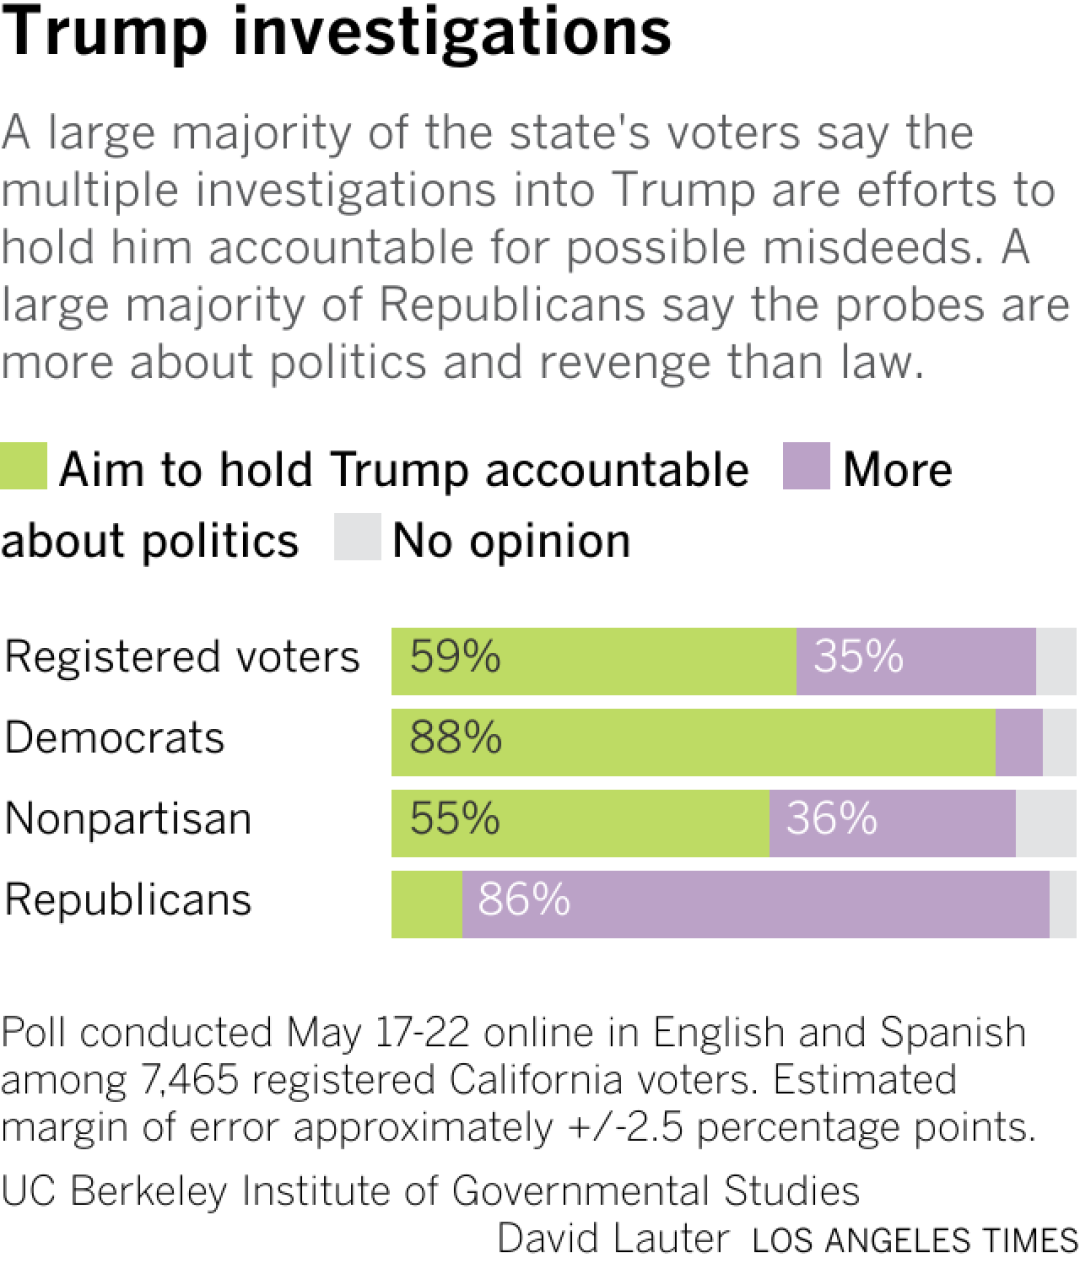 Bars show the share of Registered voters, Democrats, non-partisan voters and Republicans who said the investigations into Trump are an effort to hold him accountable or that the investigations are more about politics than law.